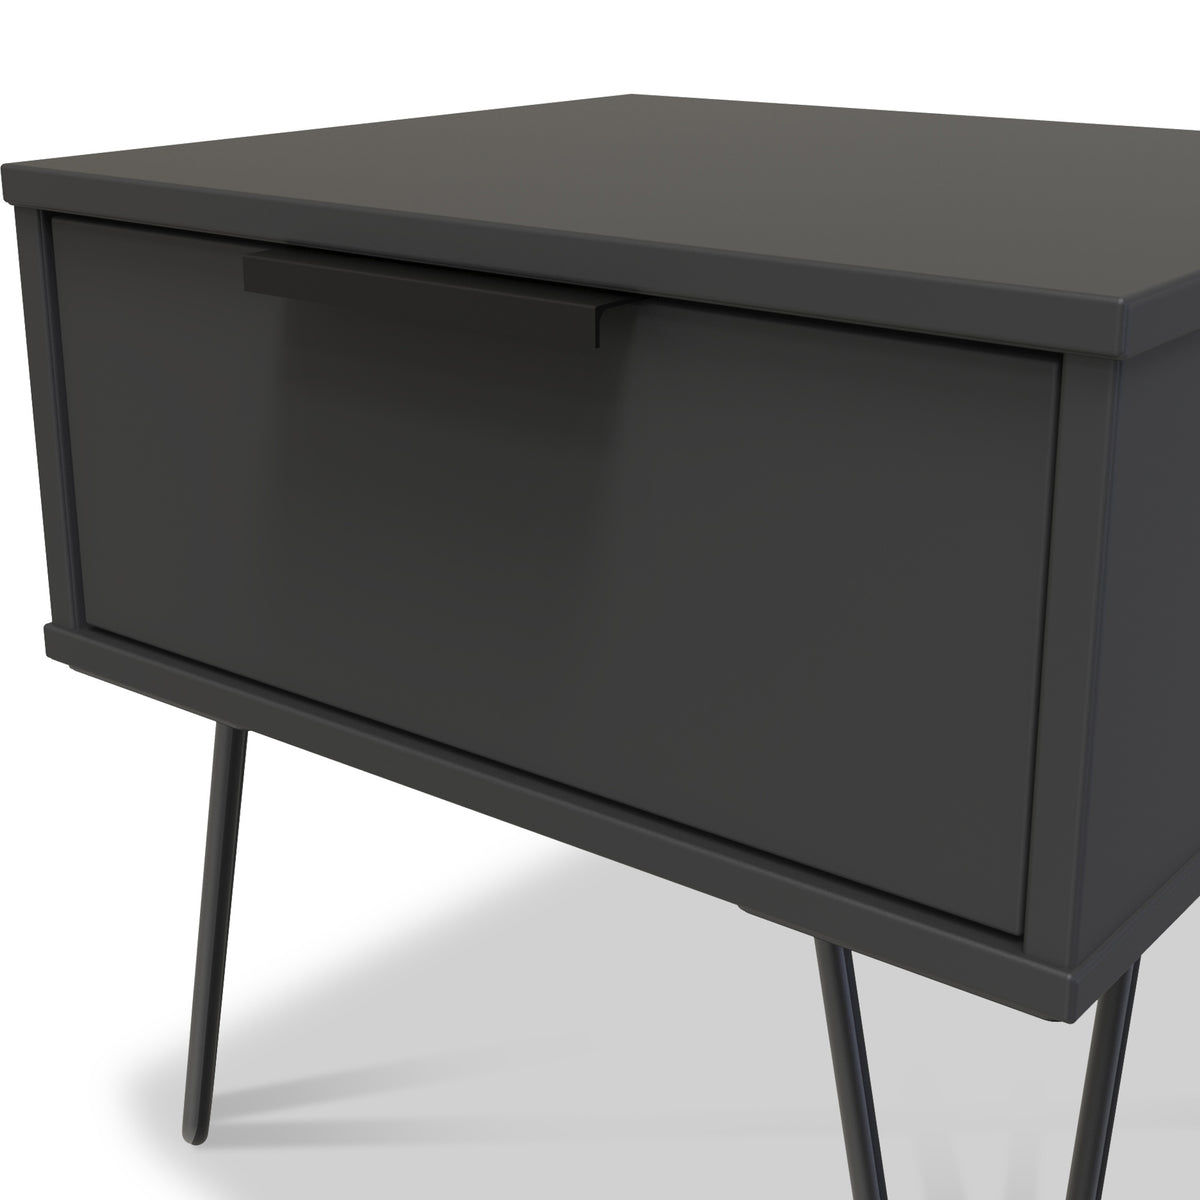 Moreno Charcoal Grey 1 Drawer Bedside Table by Roseland Furniture